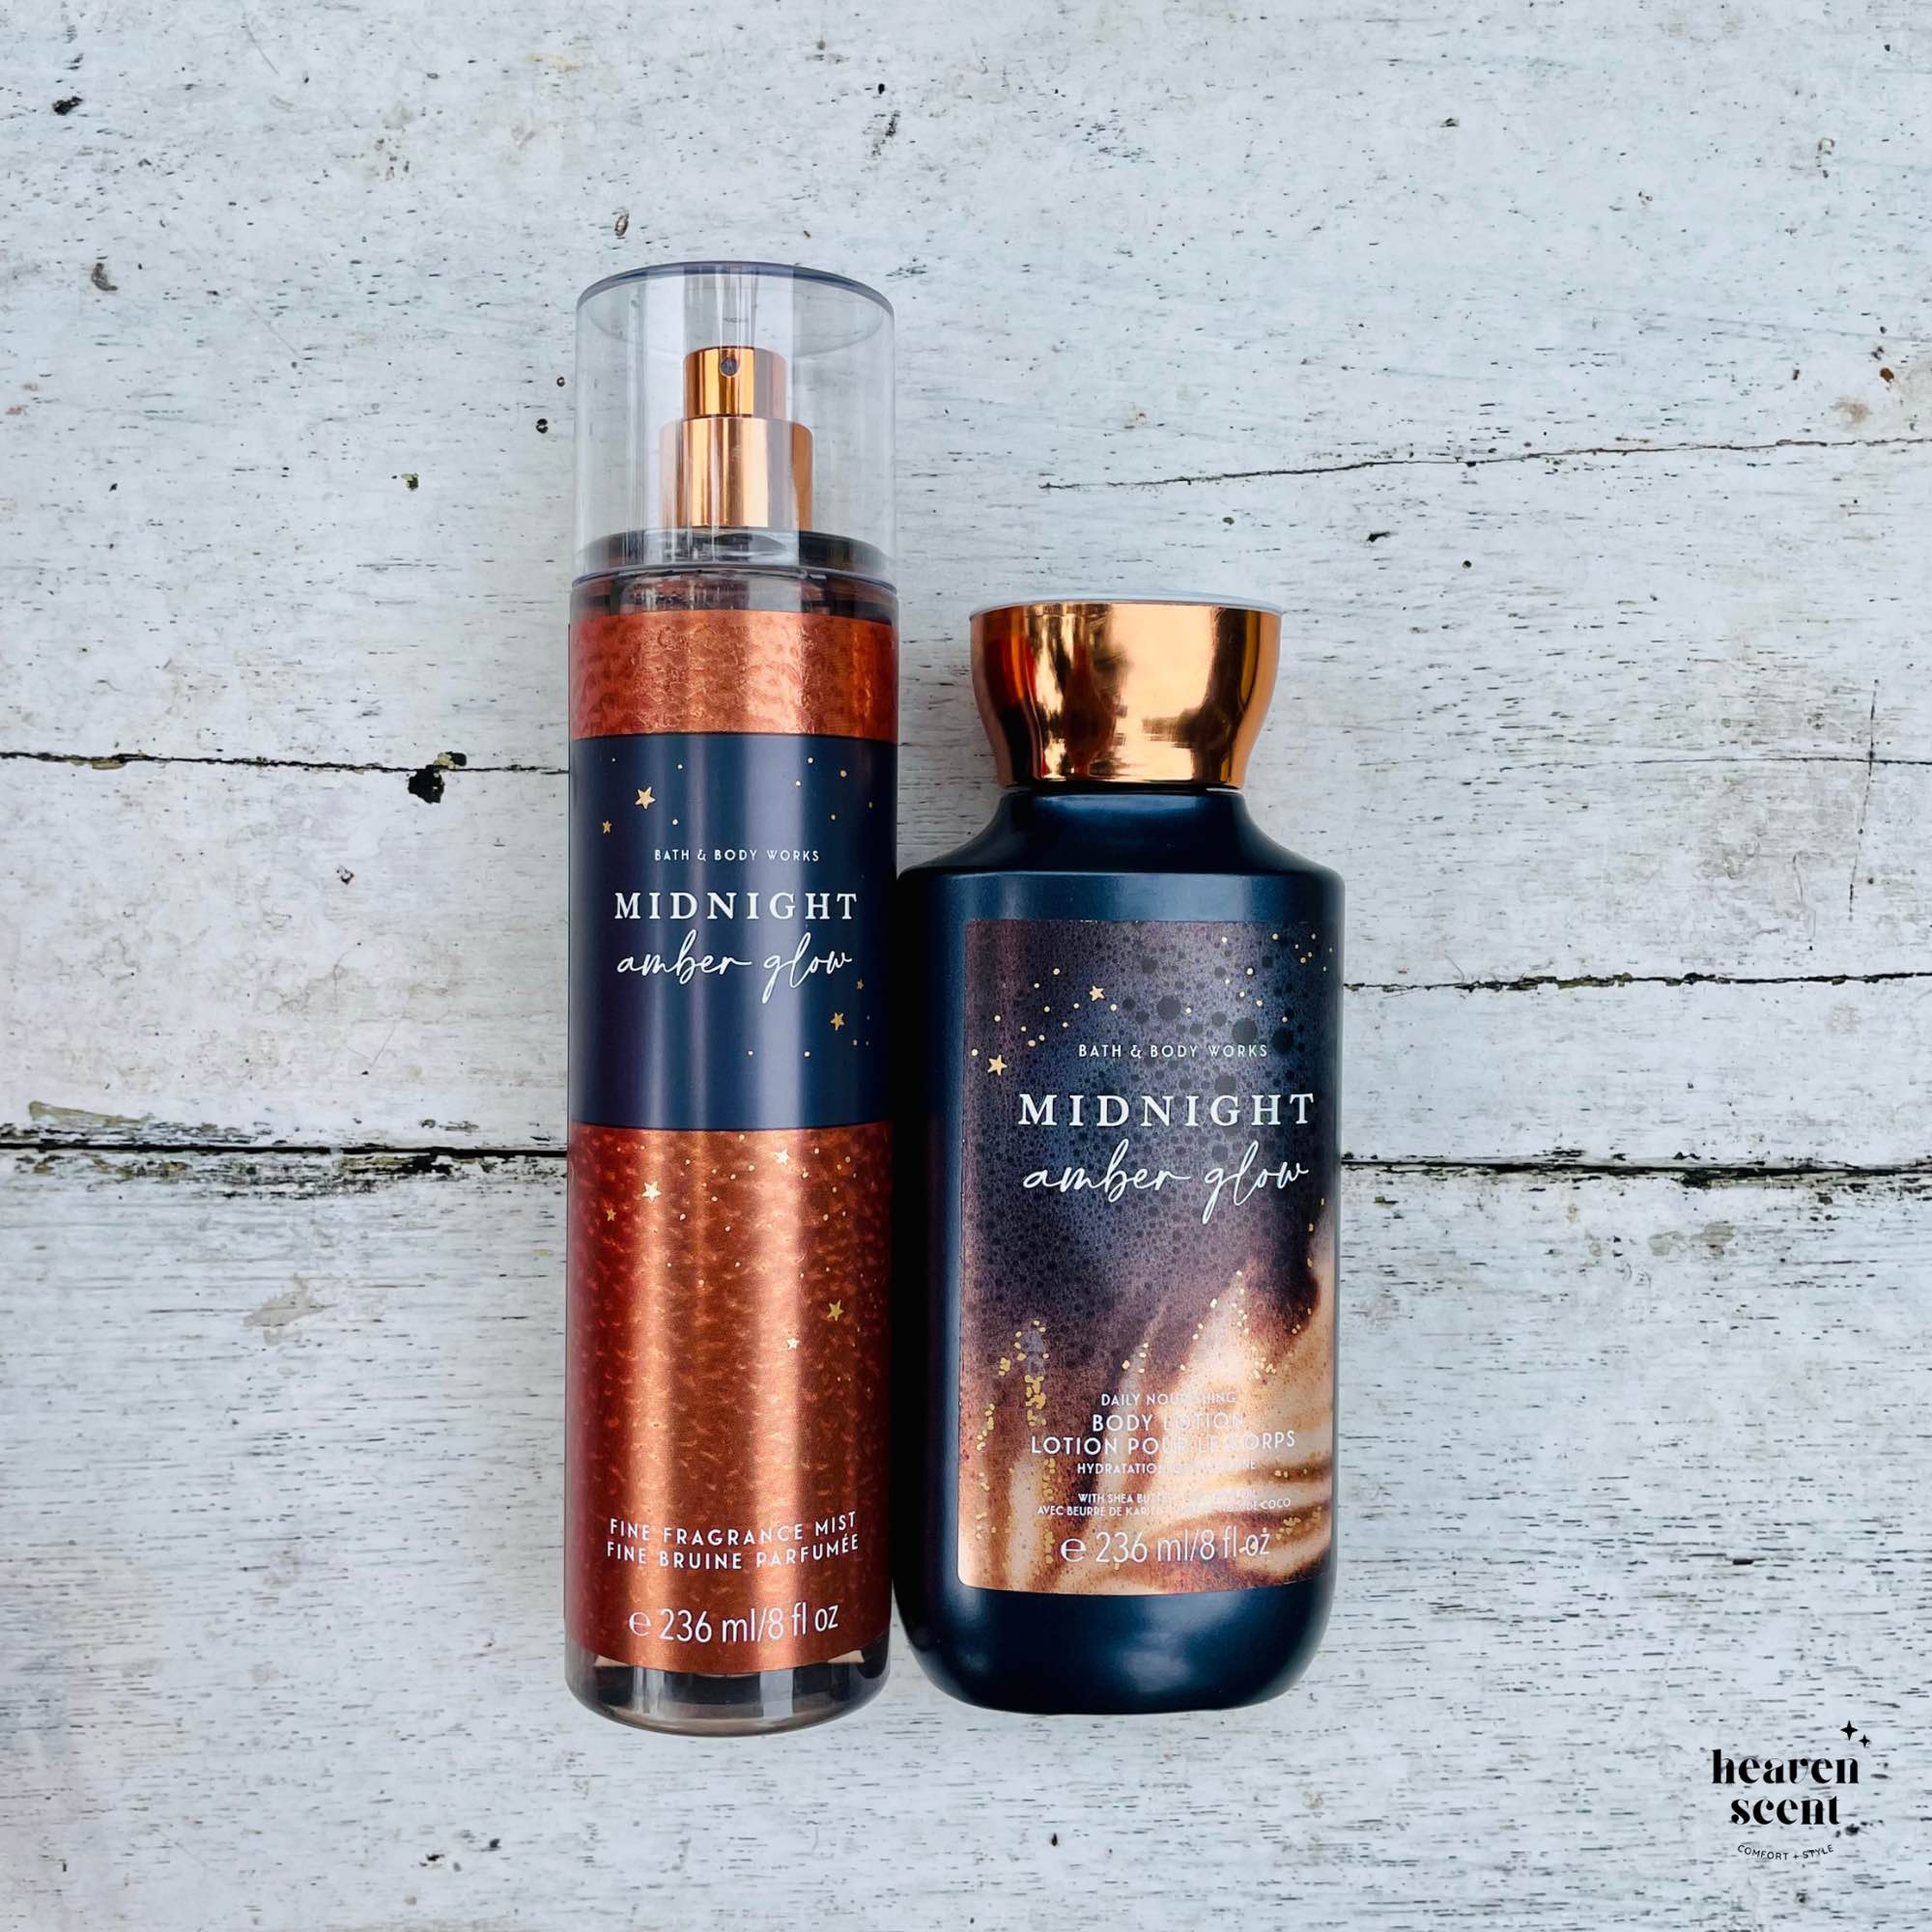 Midnight Amber Glow Bath and Body Works Fragrance mist, Beauty & Personal  Care, Fragrance & Deodorants on Carousell